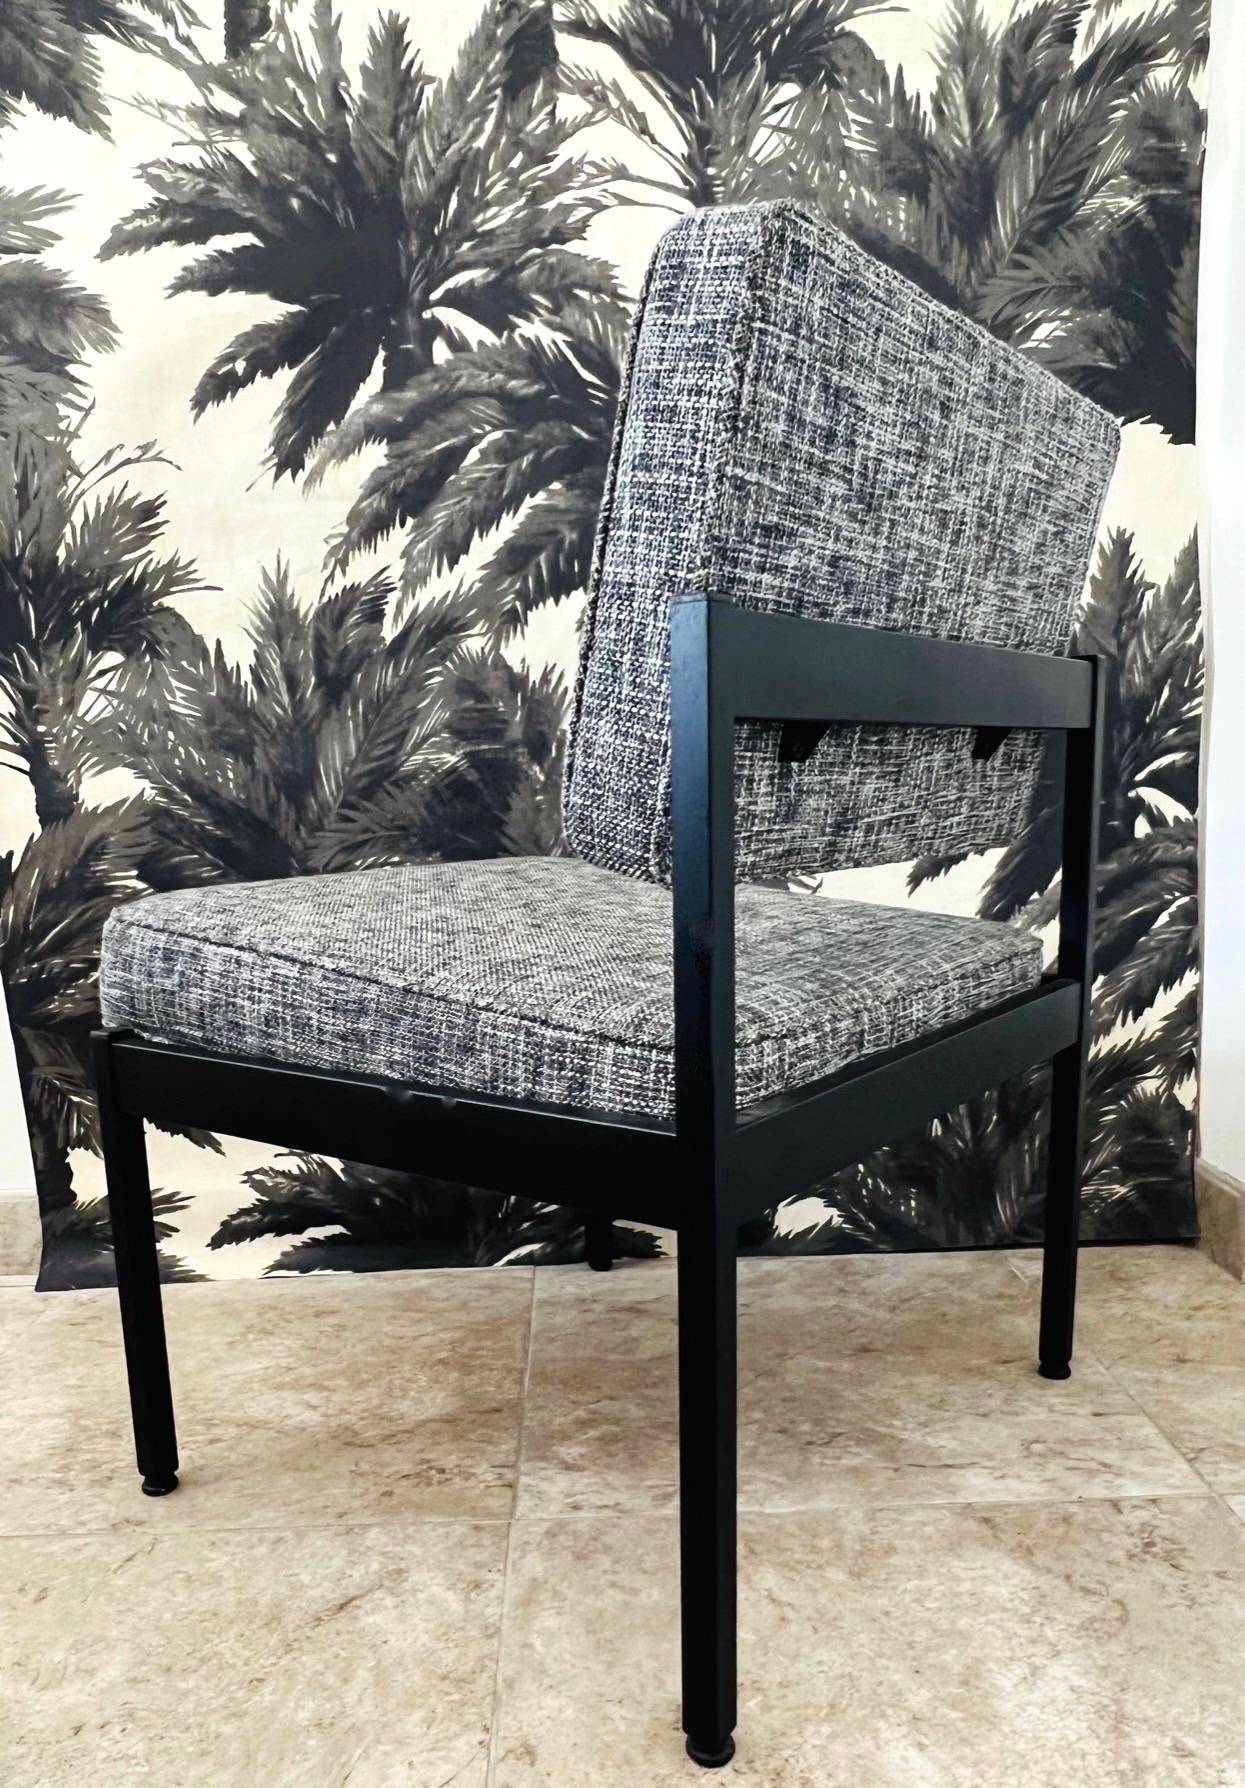 Steel Vintage Knoll Style Chair in Black and Ivory Tweed Upholstery, c. 1970's For Sale